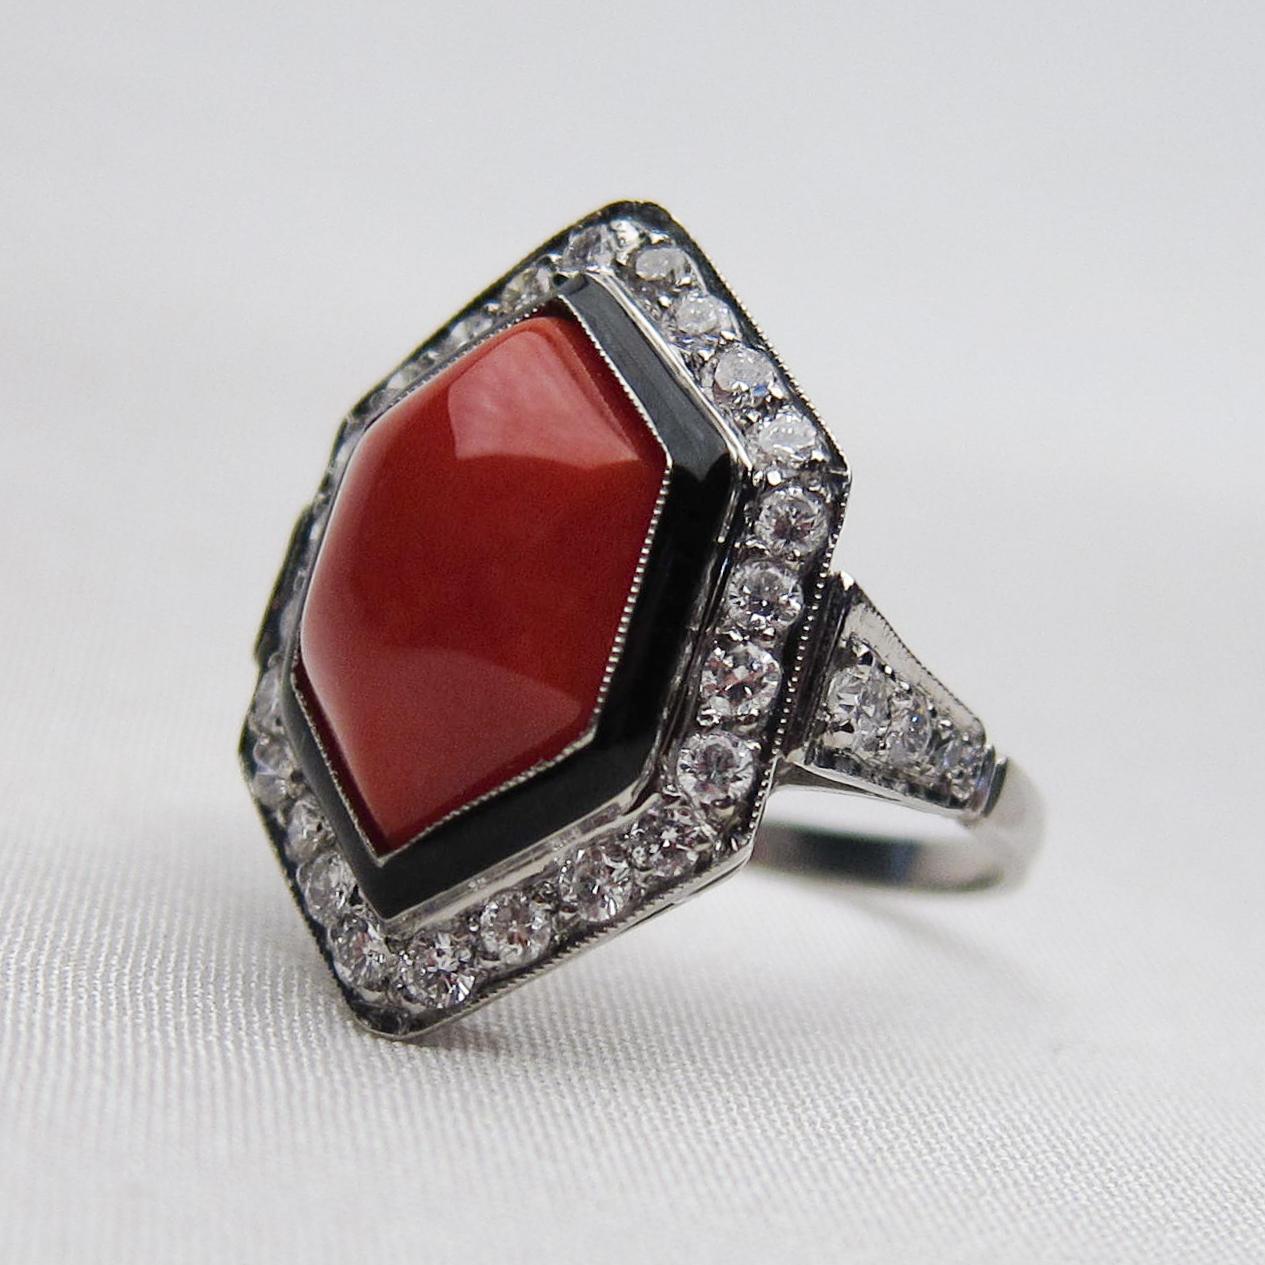  3.70 Carat Coral Cabochon and Diamond Halo Ring Accented with Enamel In Excellent Condition For Sale In Seattle, WA